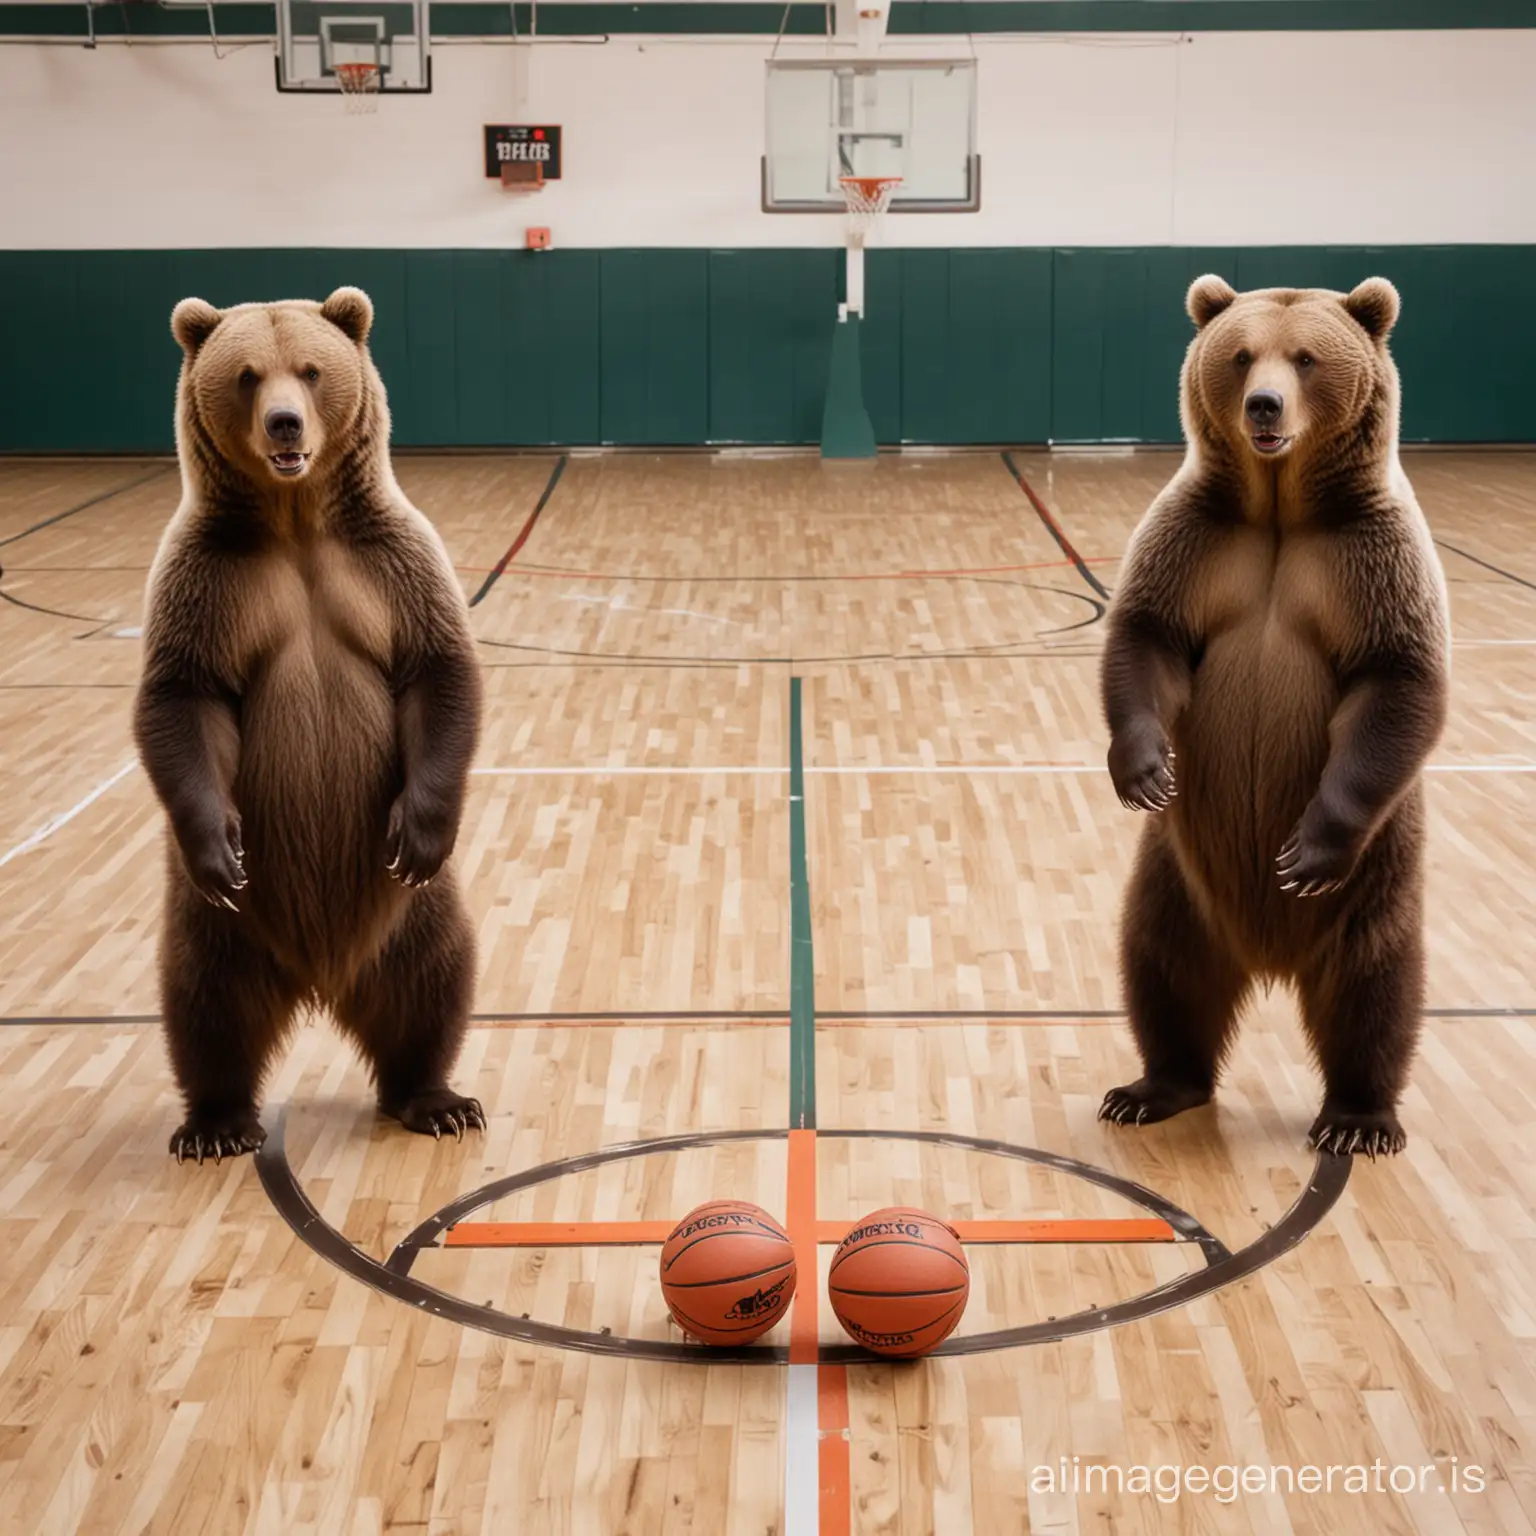 Grizzly-Bears-Playing-Basketball-on-Court